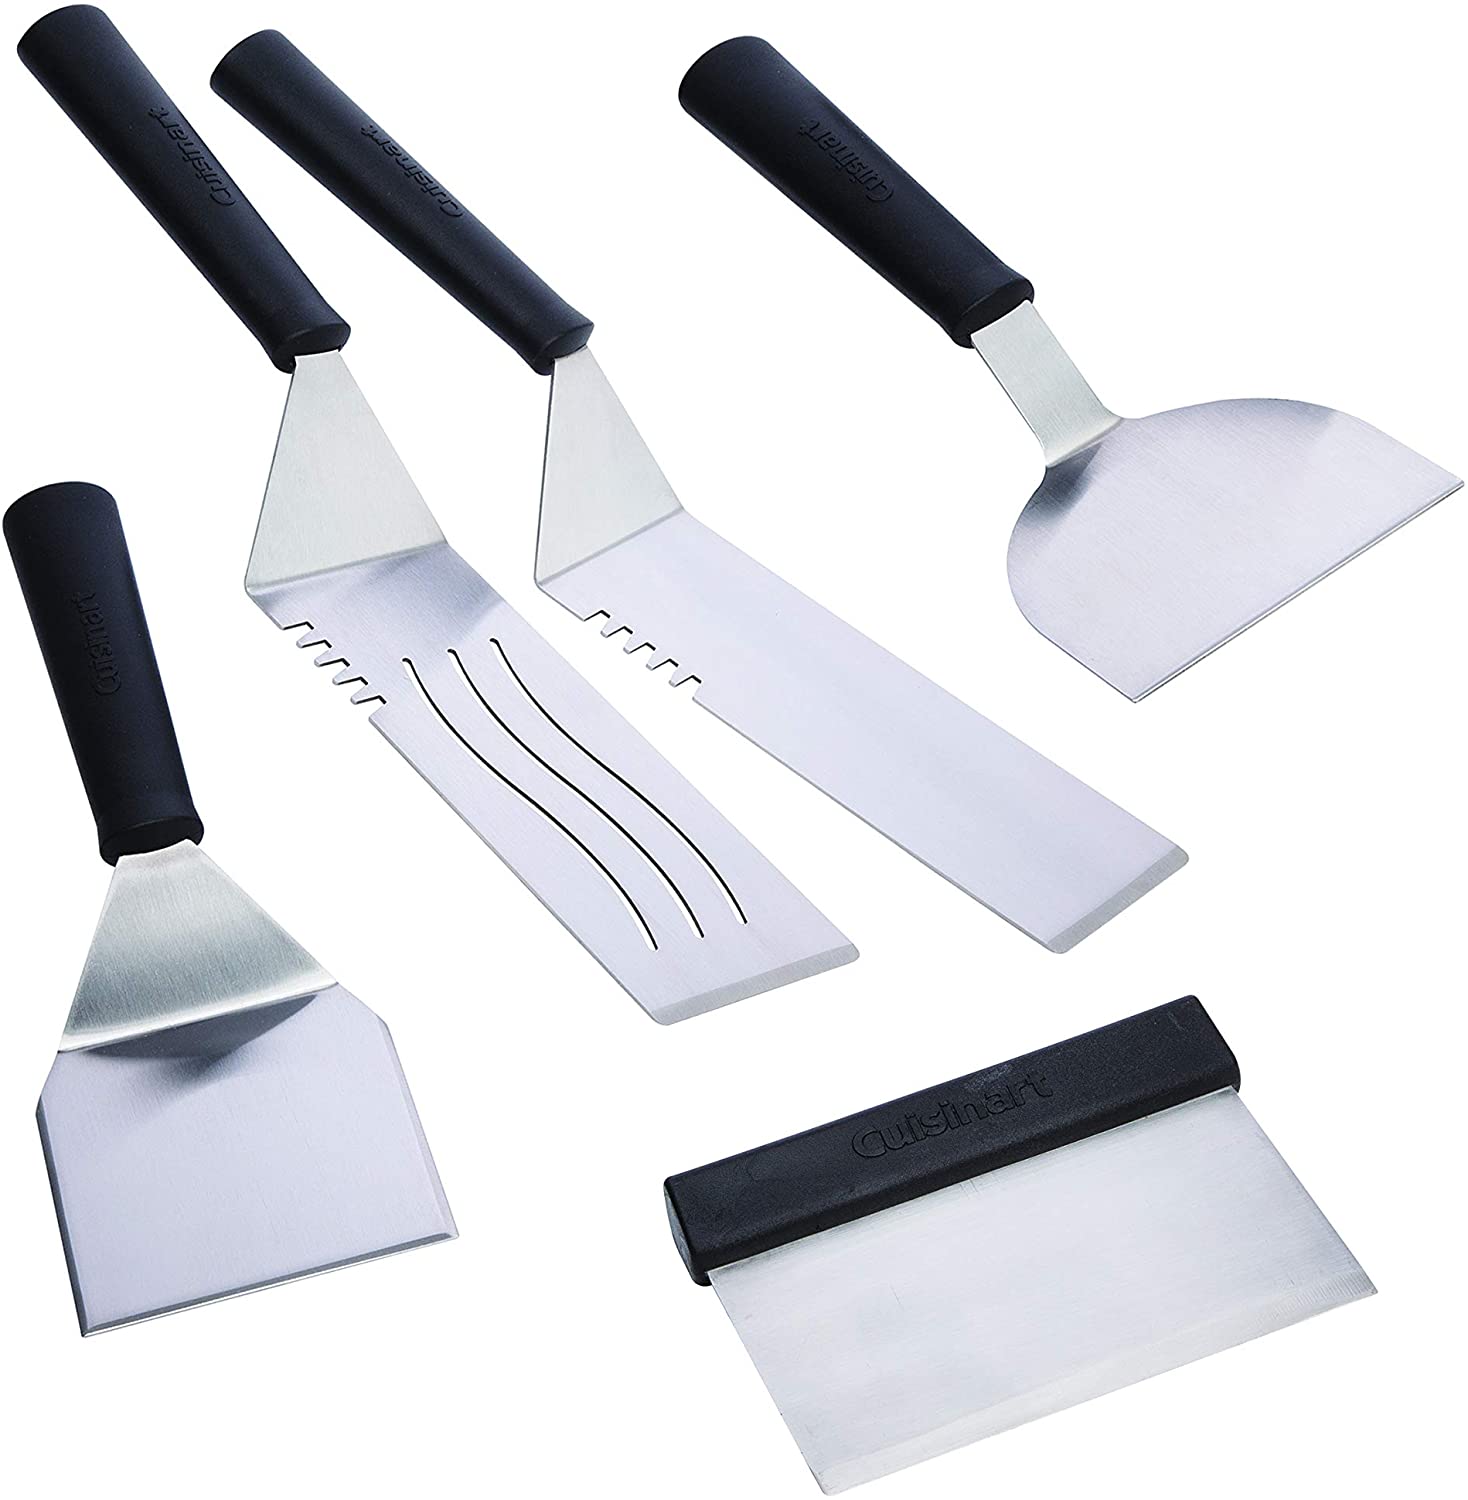 Cuisinart CGS-509 Stainless Steel, Griddle Spatula Set, 5-Piece - $15.52